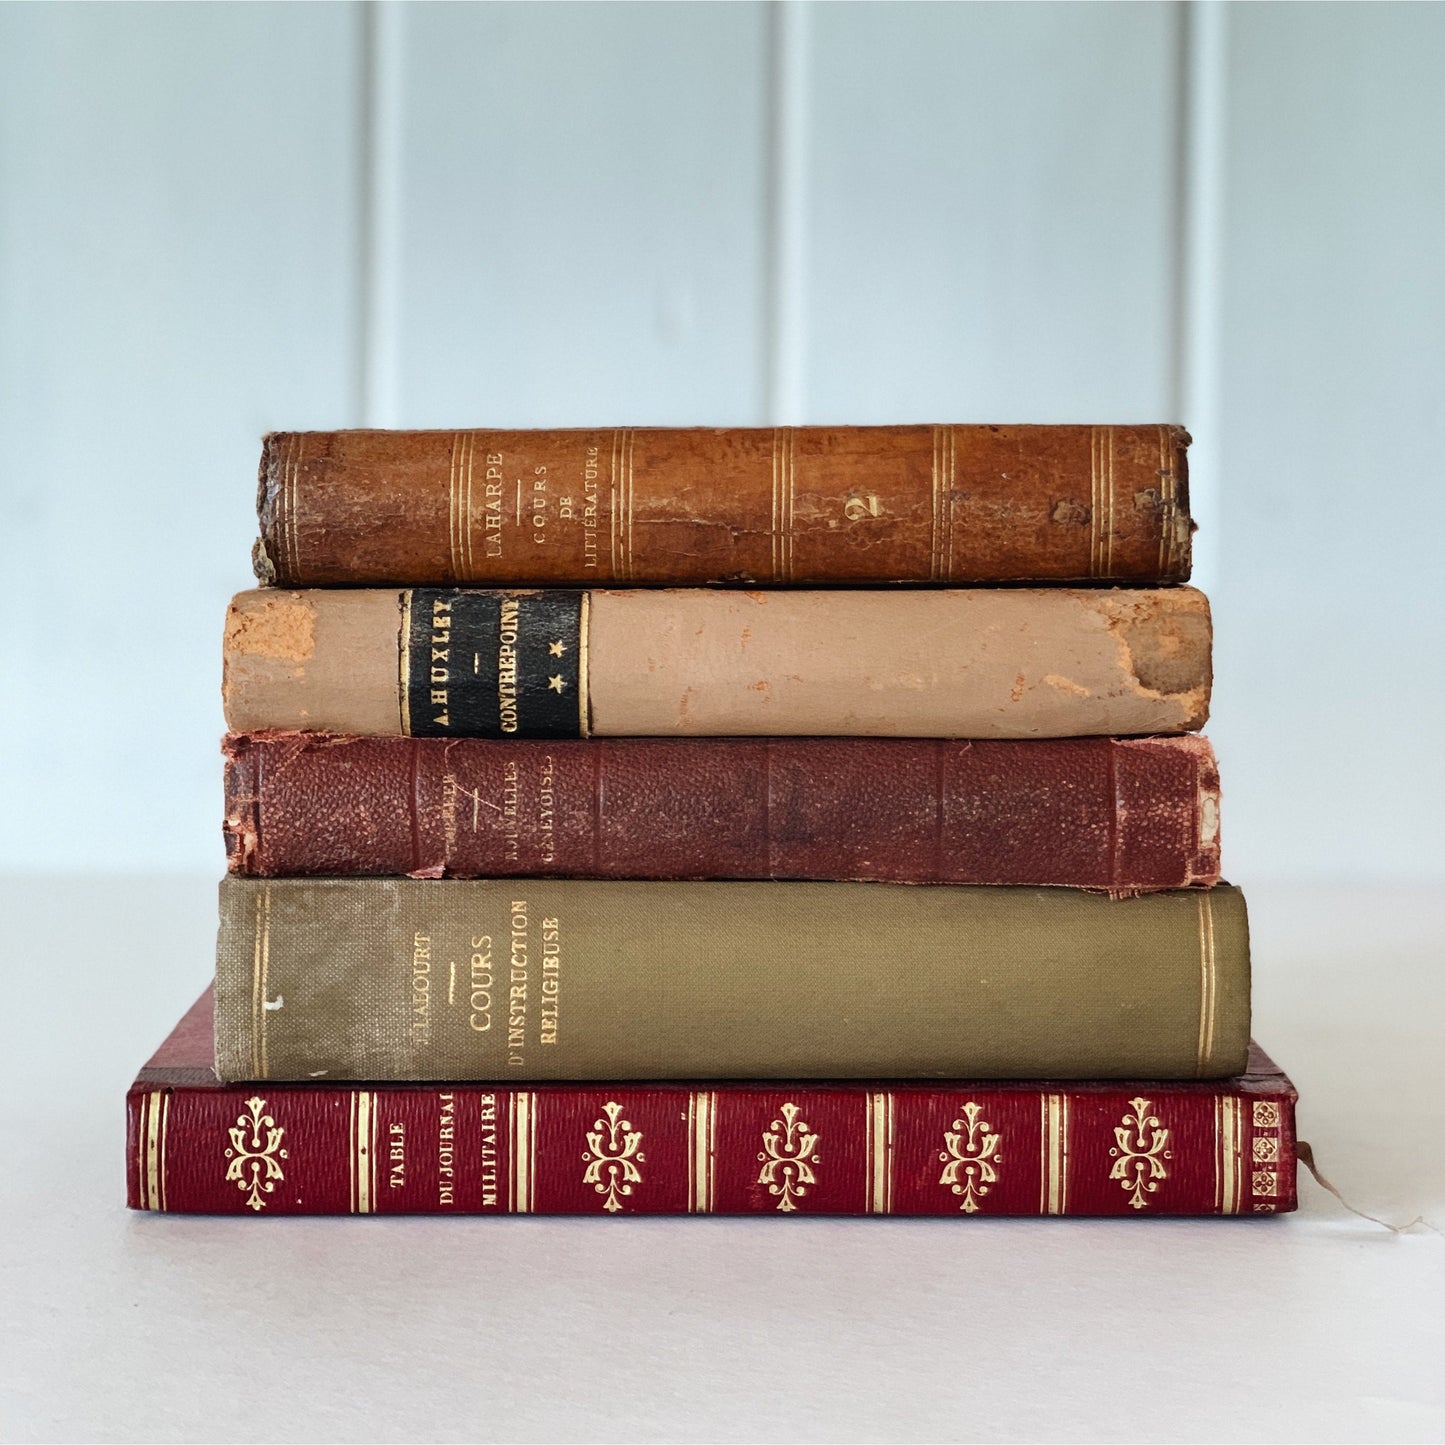 Antique Leather-Bound French Books,1800s-1900s Book Bundle, Handmade Decor